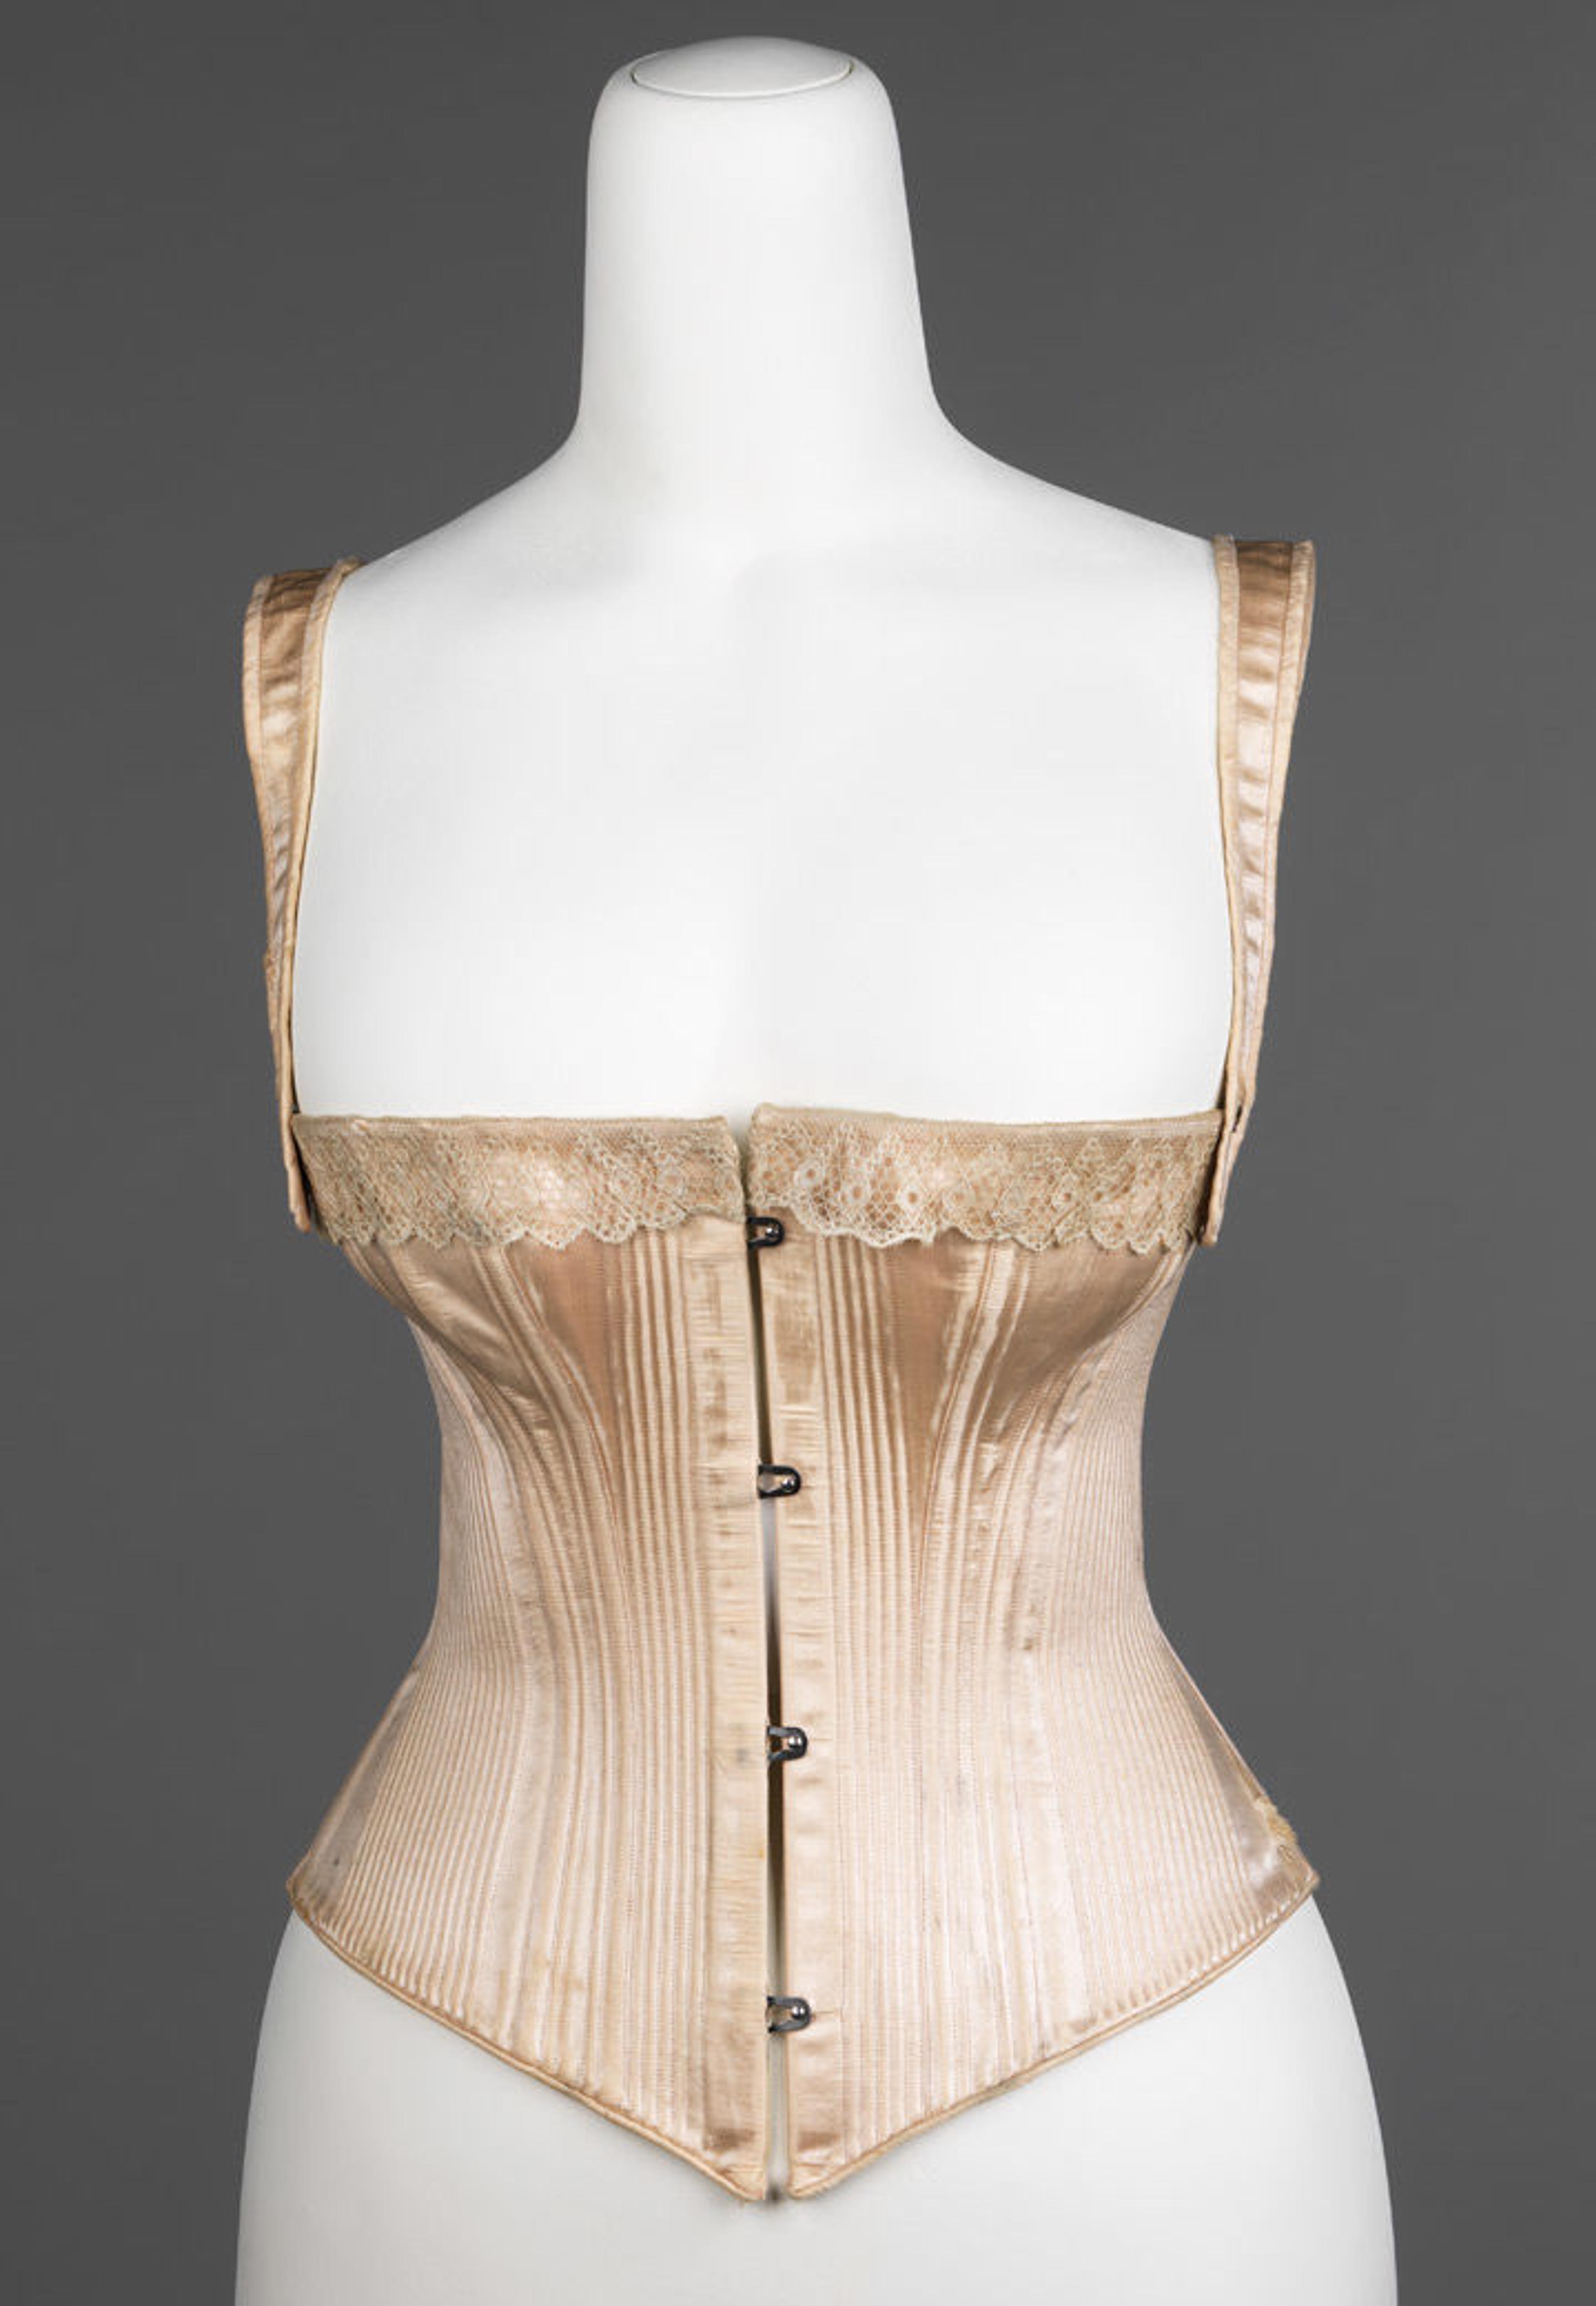 Corset from the Royal Worcester Corset Company